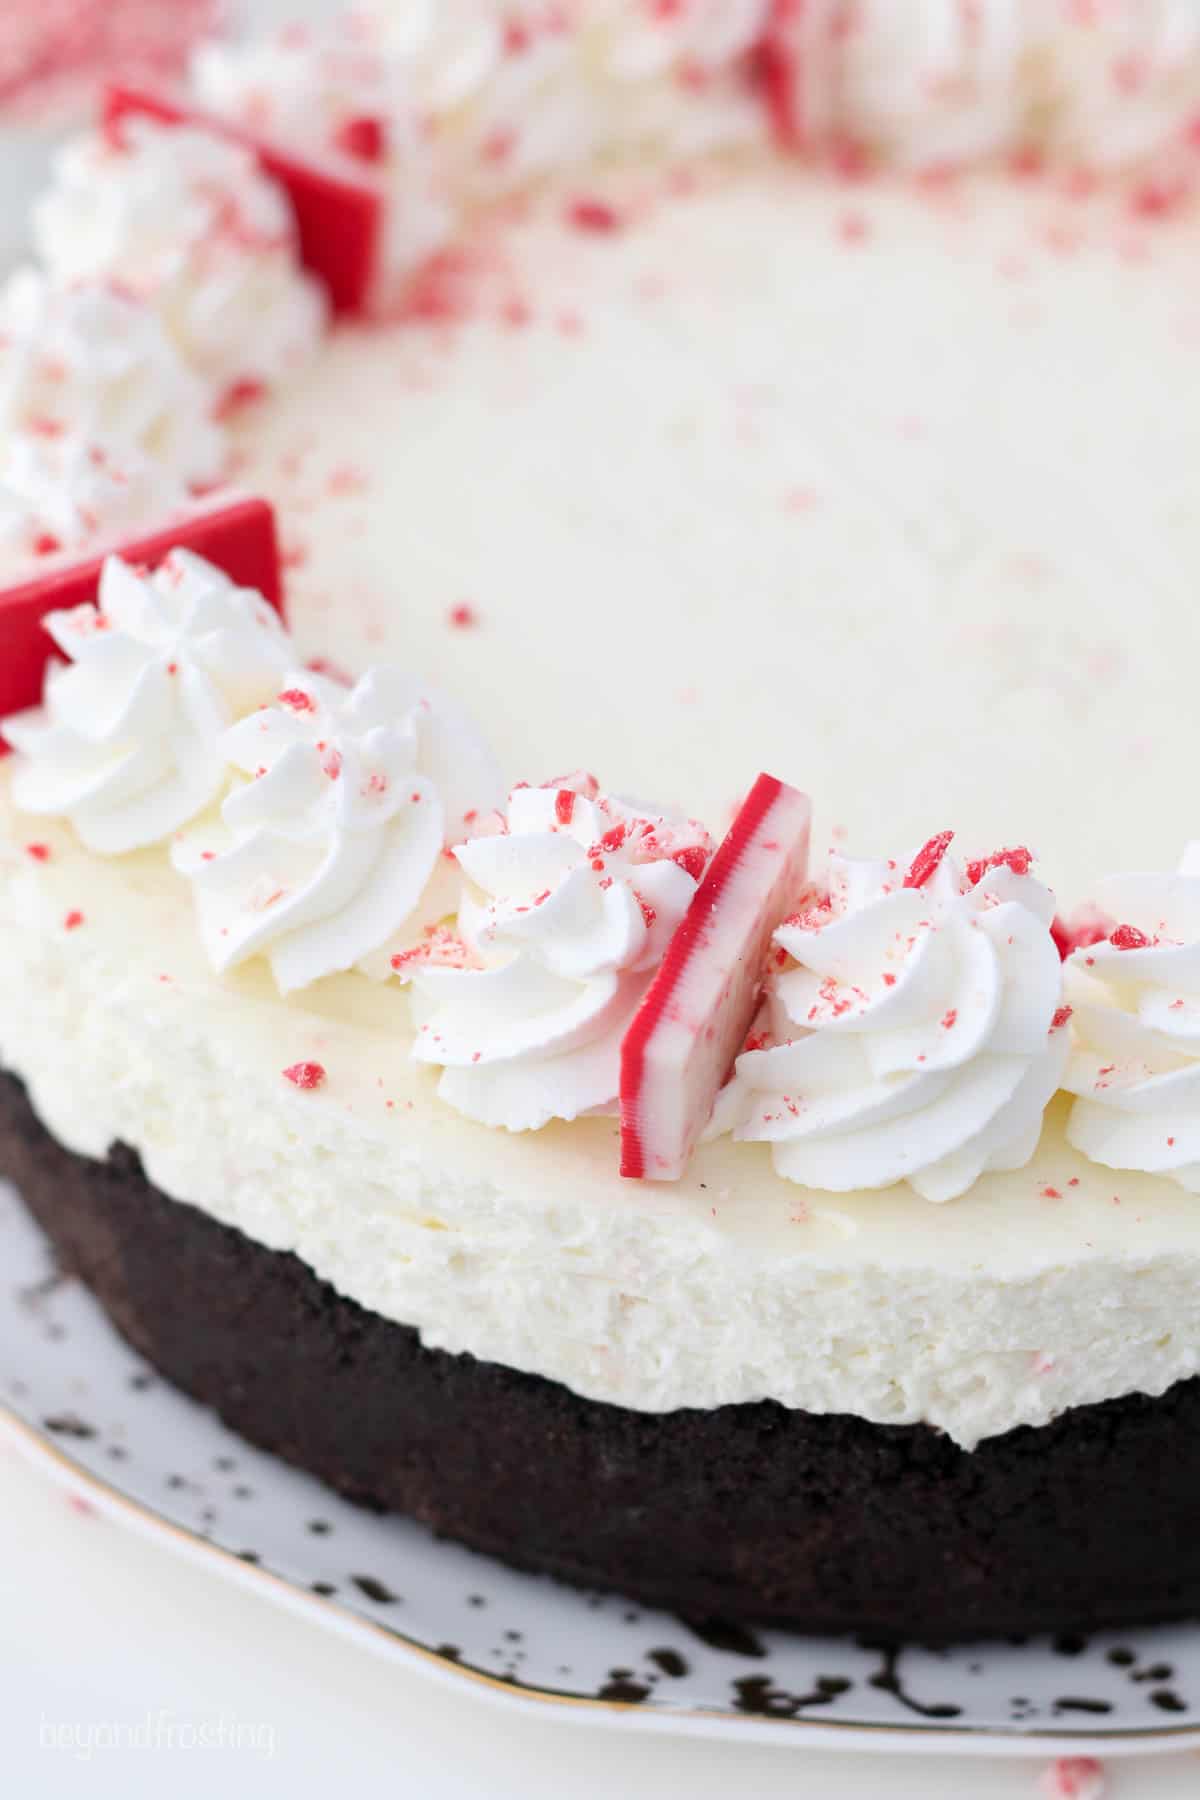 A close up shot of a whole cheesecake garnished with whipped cream and crushed peppermint chocolate